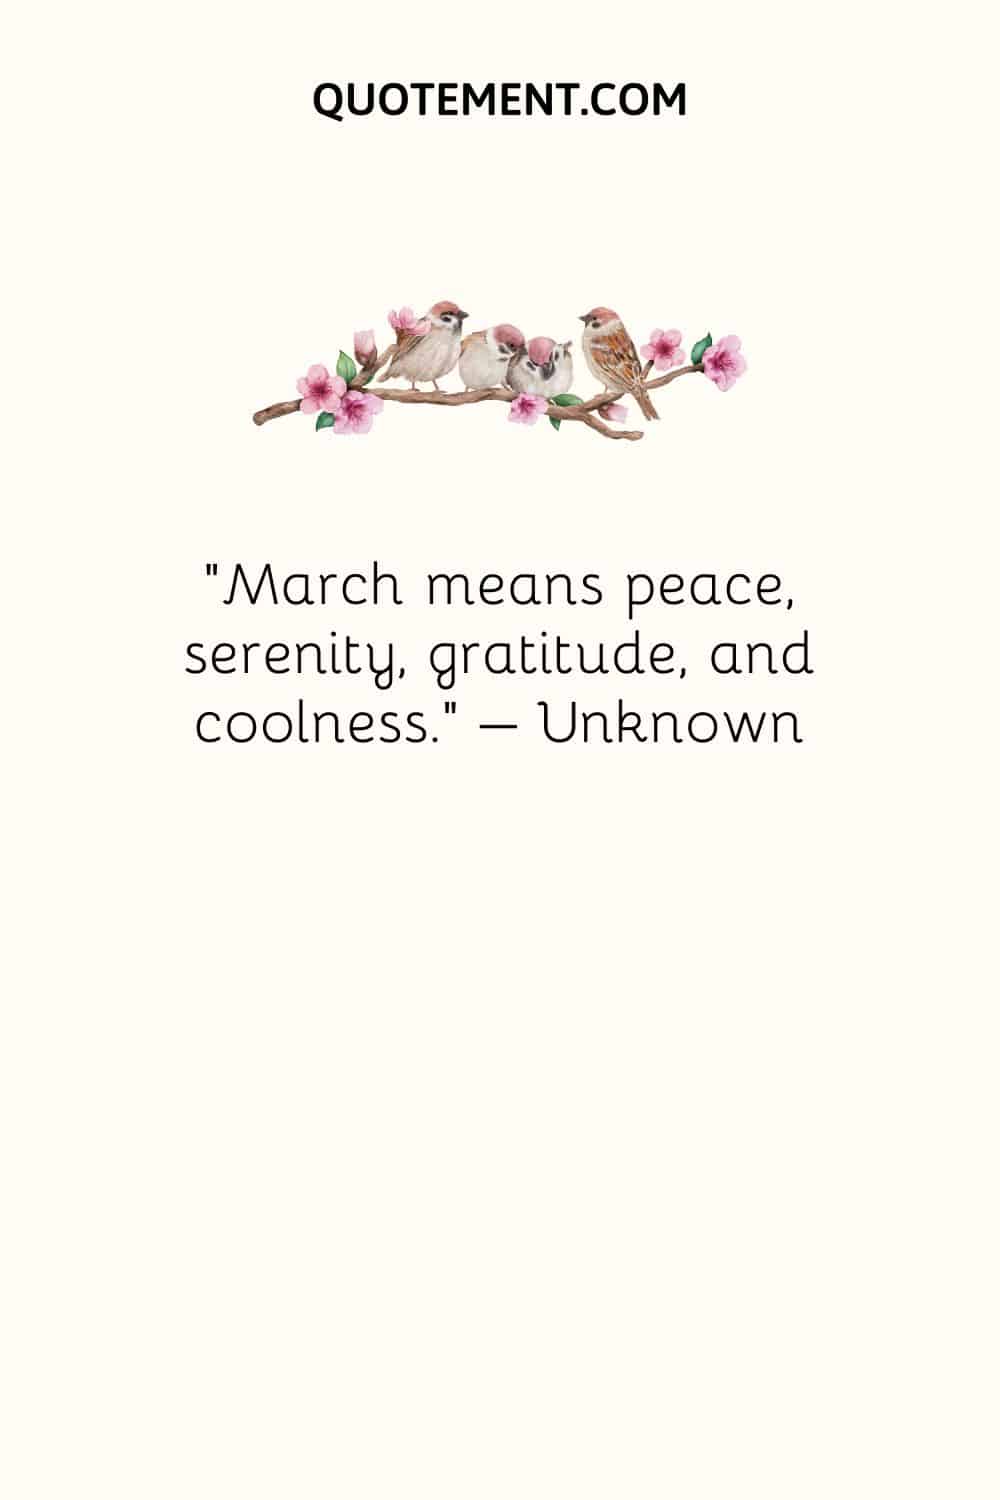 March means peace, serenity, gratitude, and coolness. – Unknown